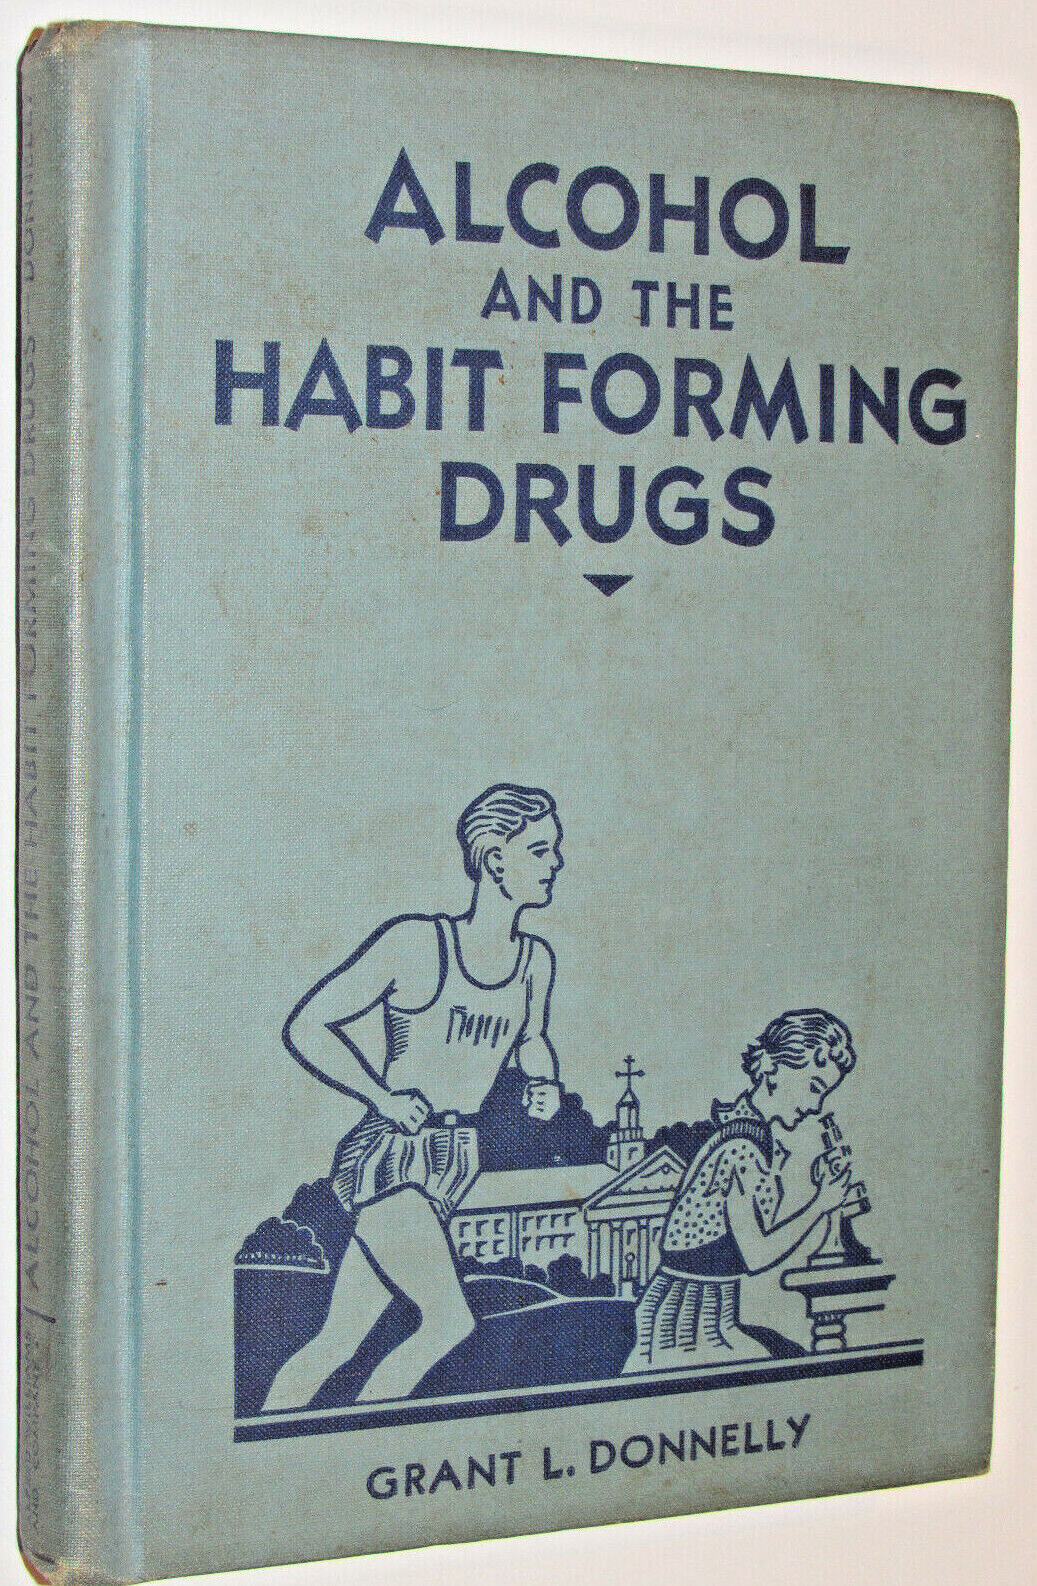 VTG 1936 BOOK 'ALCOHOL & THE HABIT FORMING DRUGS' 1st ED NC SCHOOL TEXTBOOK